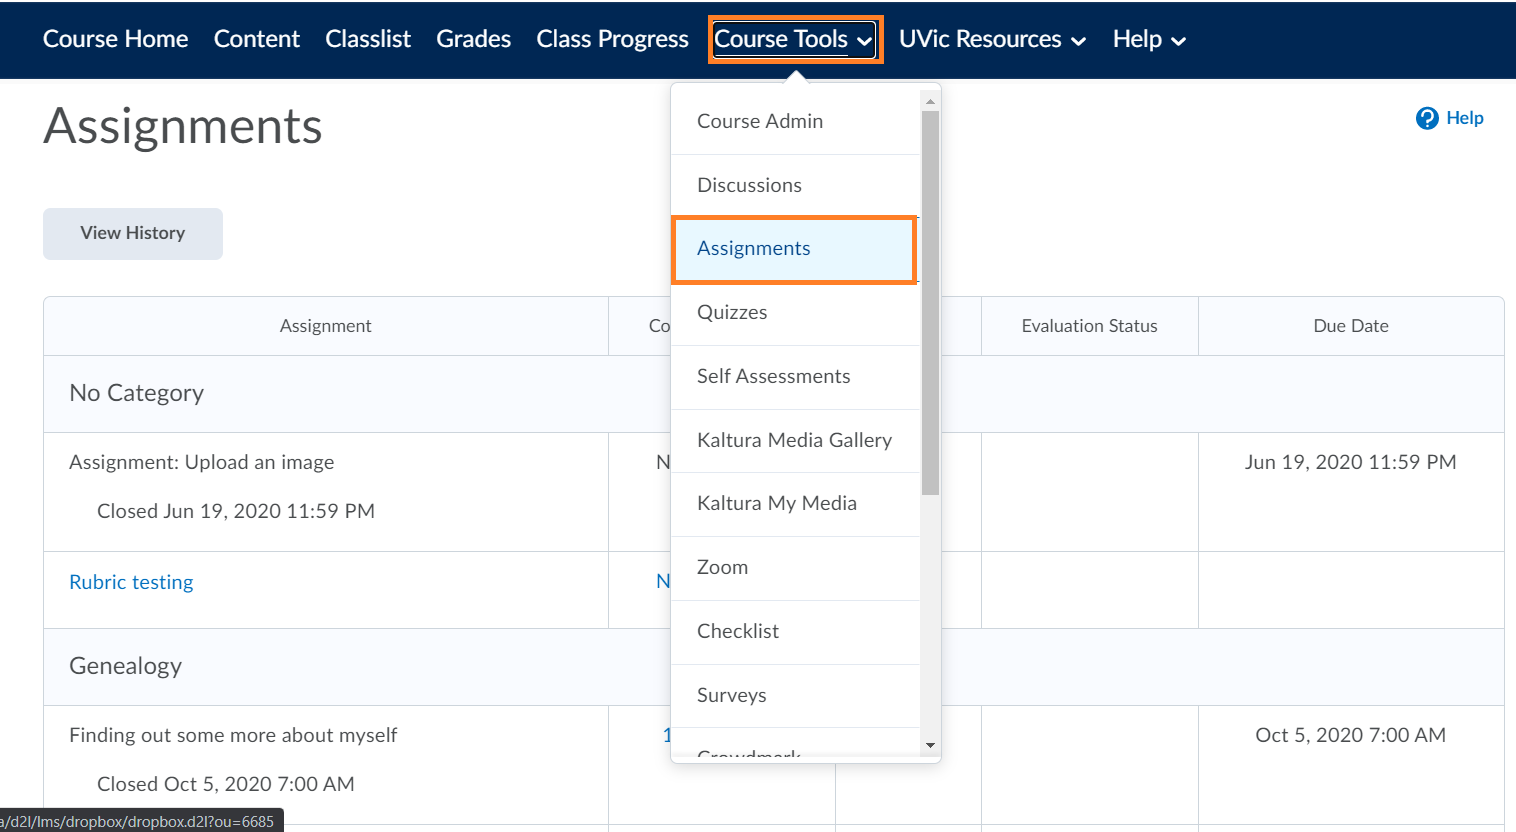 Assignments is the third option under the Course Tools tab.